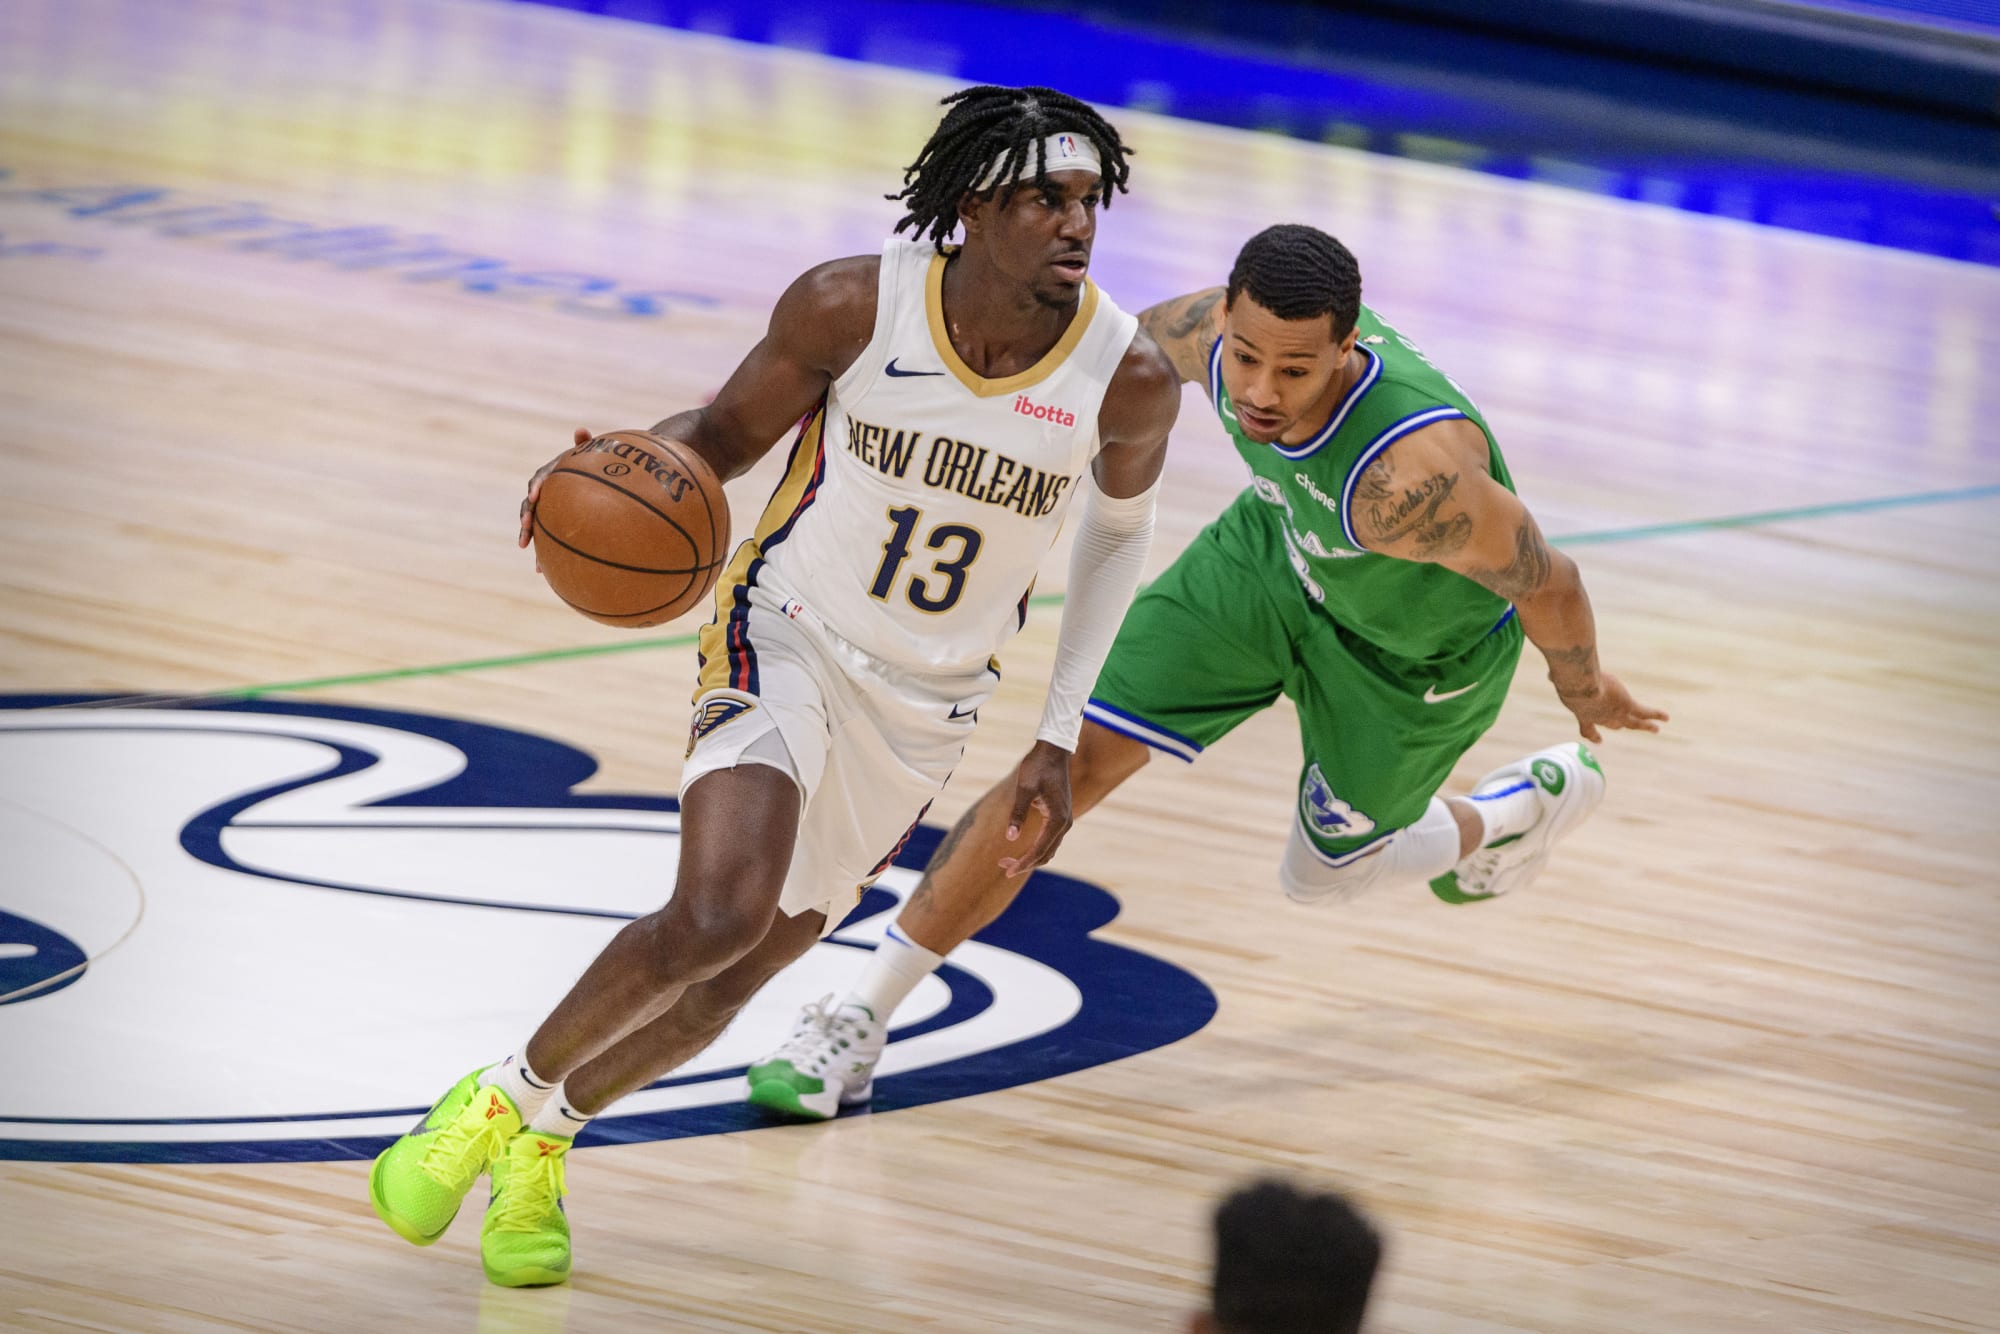 Iimprovement of Kira Lewis shows where Pelicans are headed